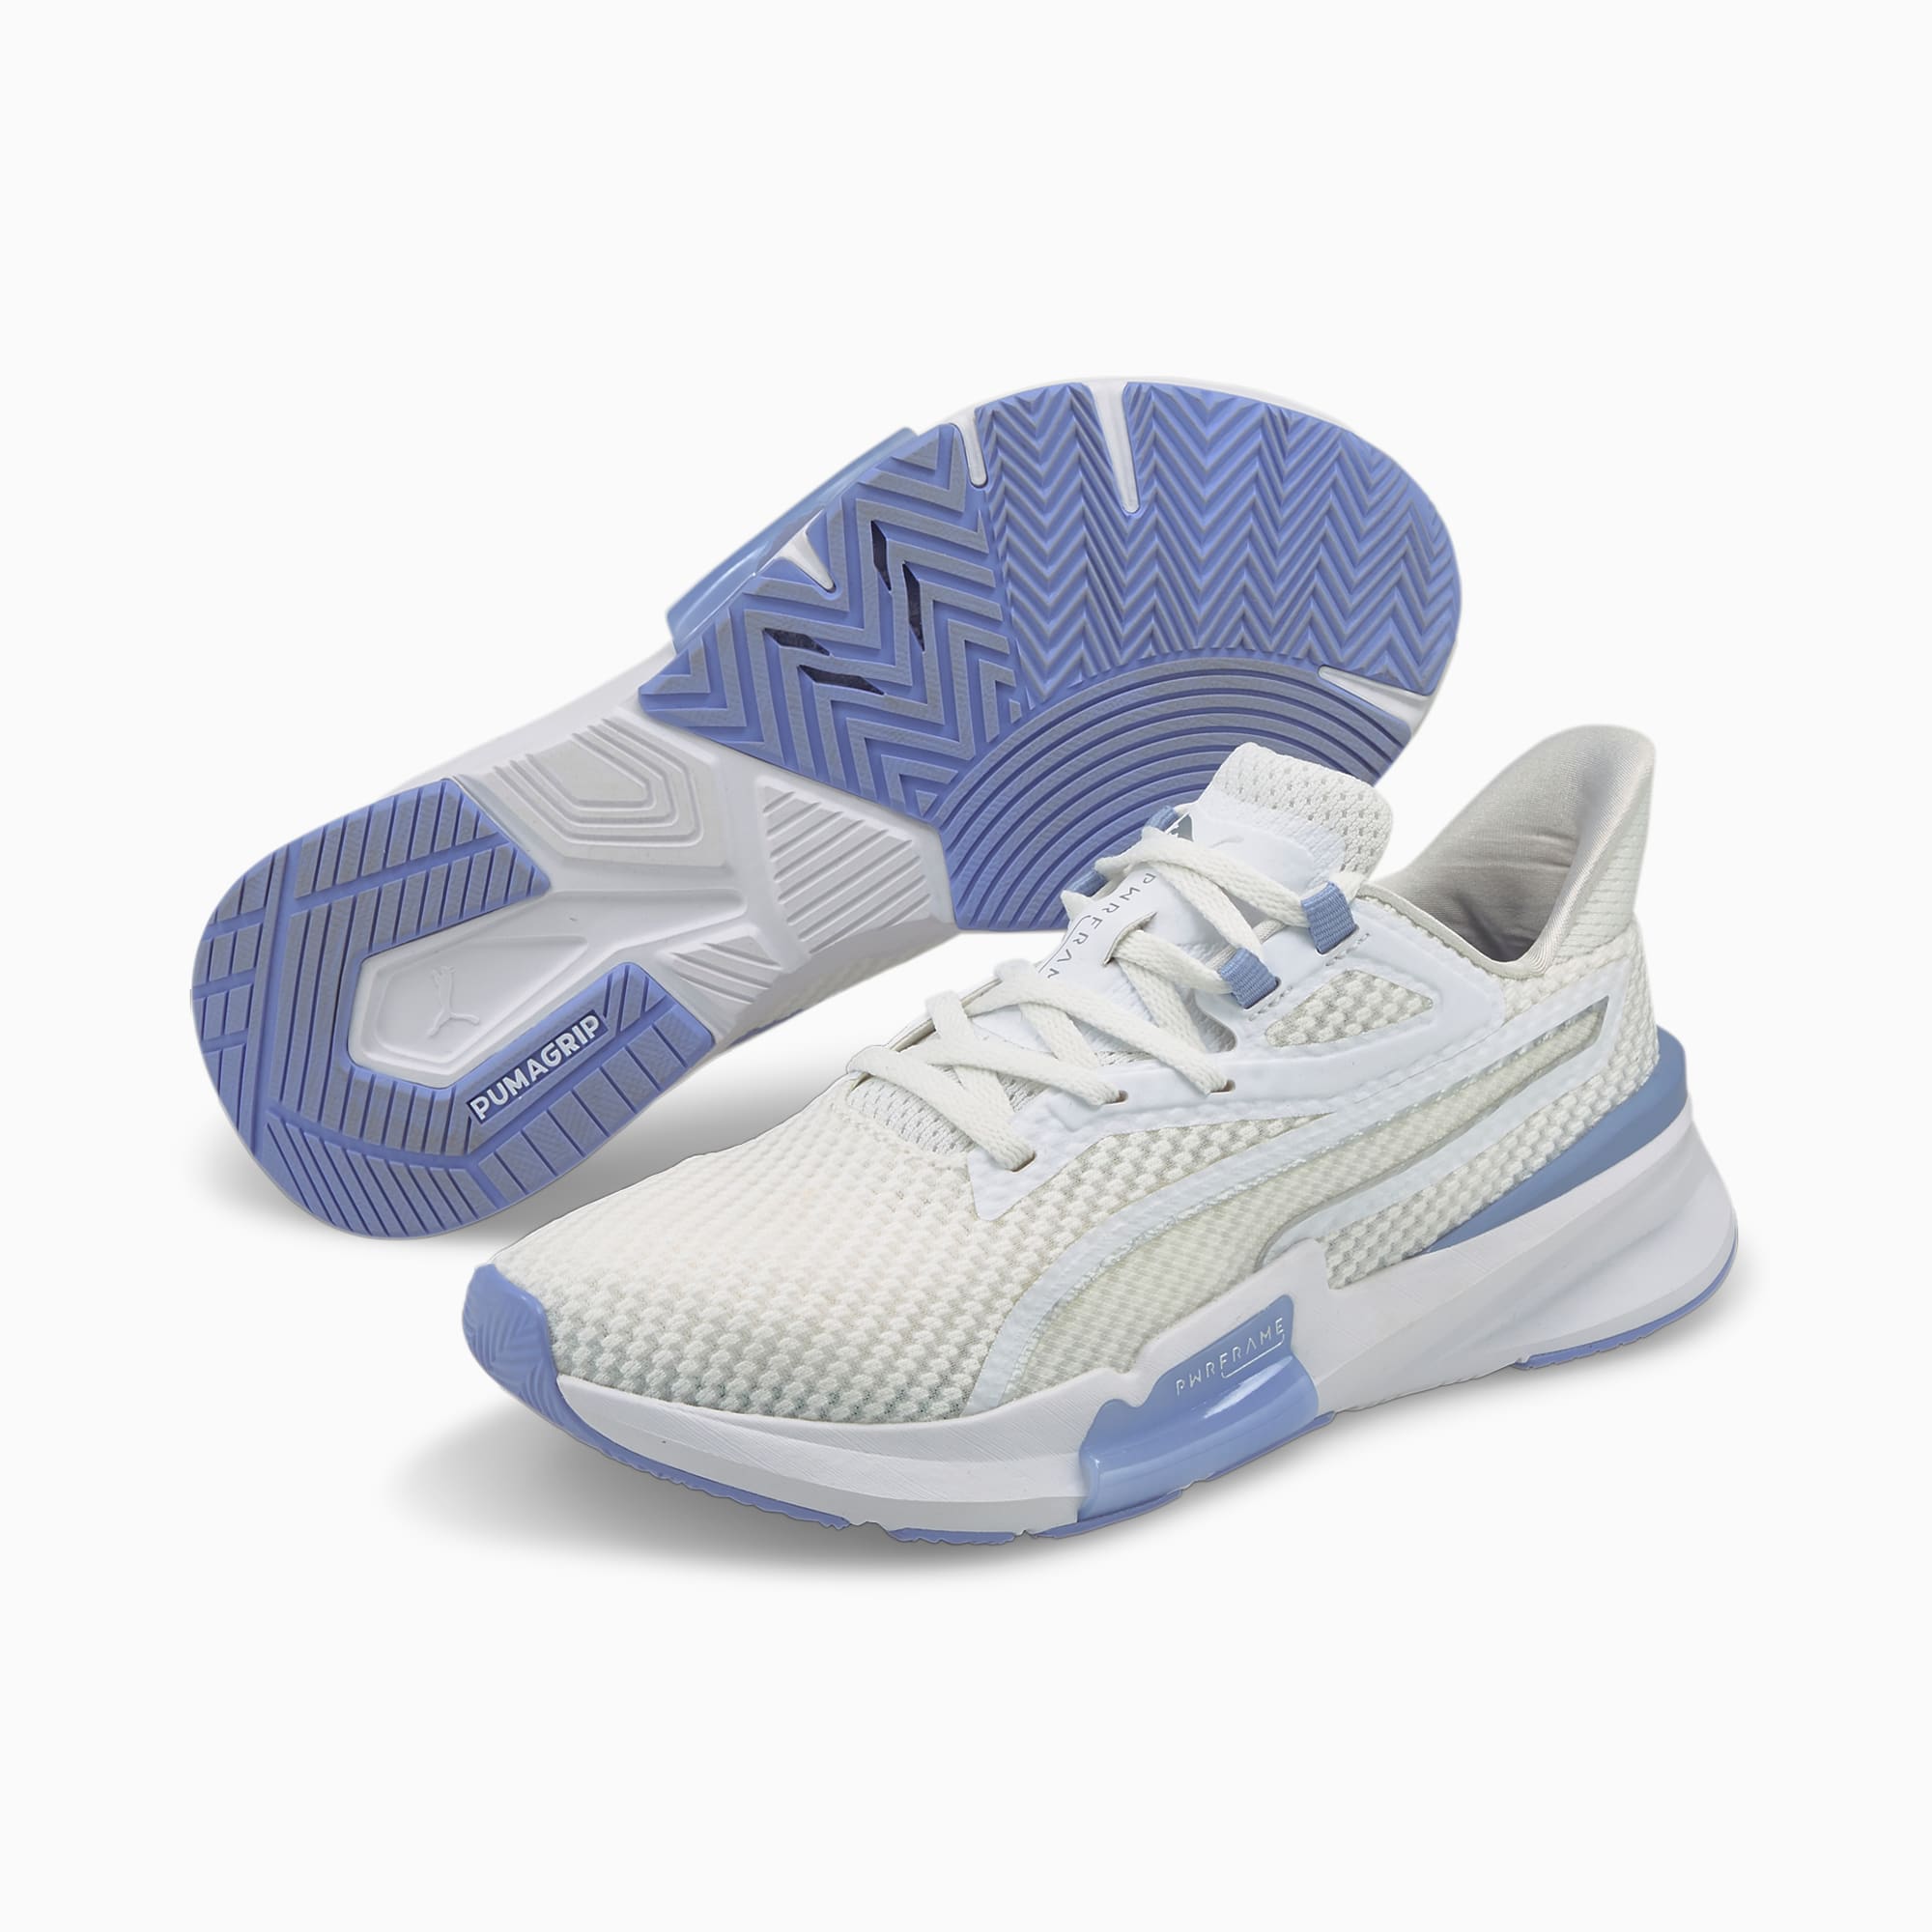 PUMA Pwrframe Tr Training Shoes Women, White/Easter Egg, Size 35,5, Shoes